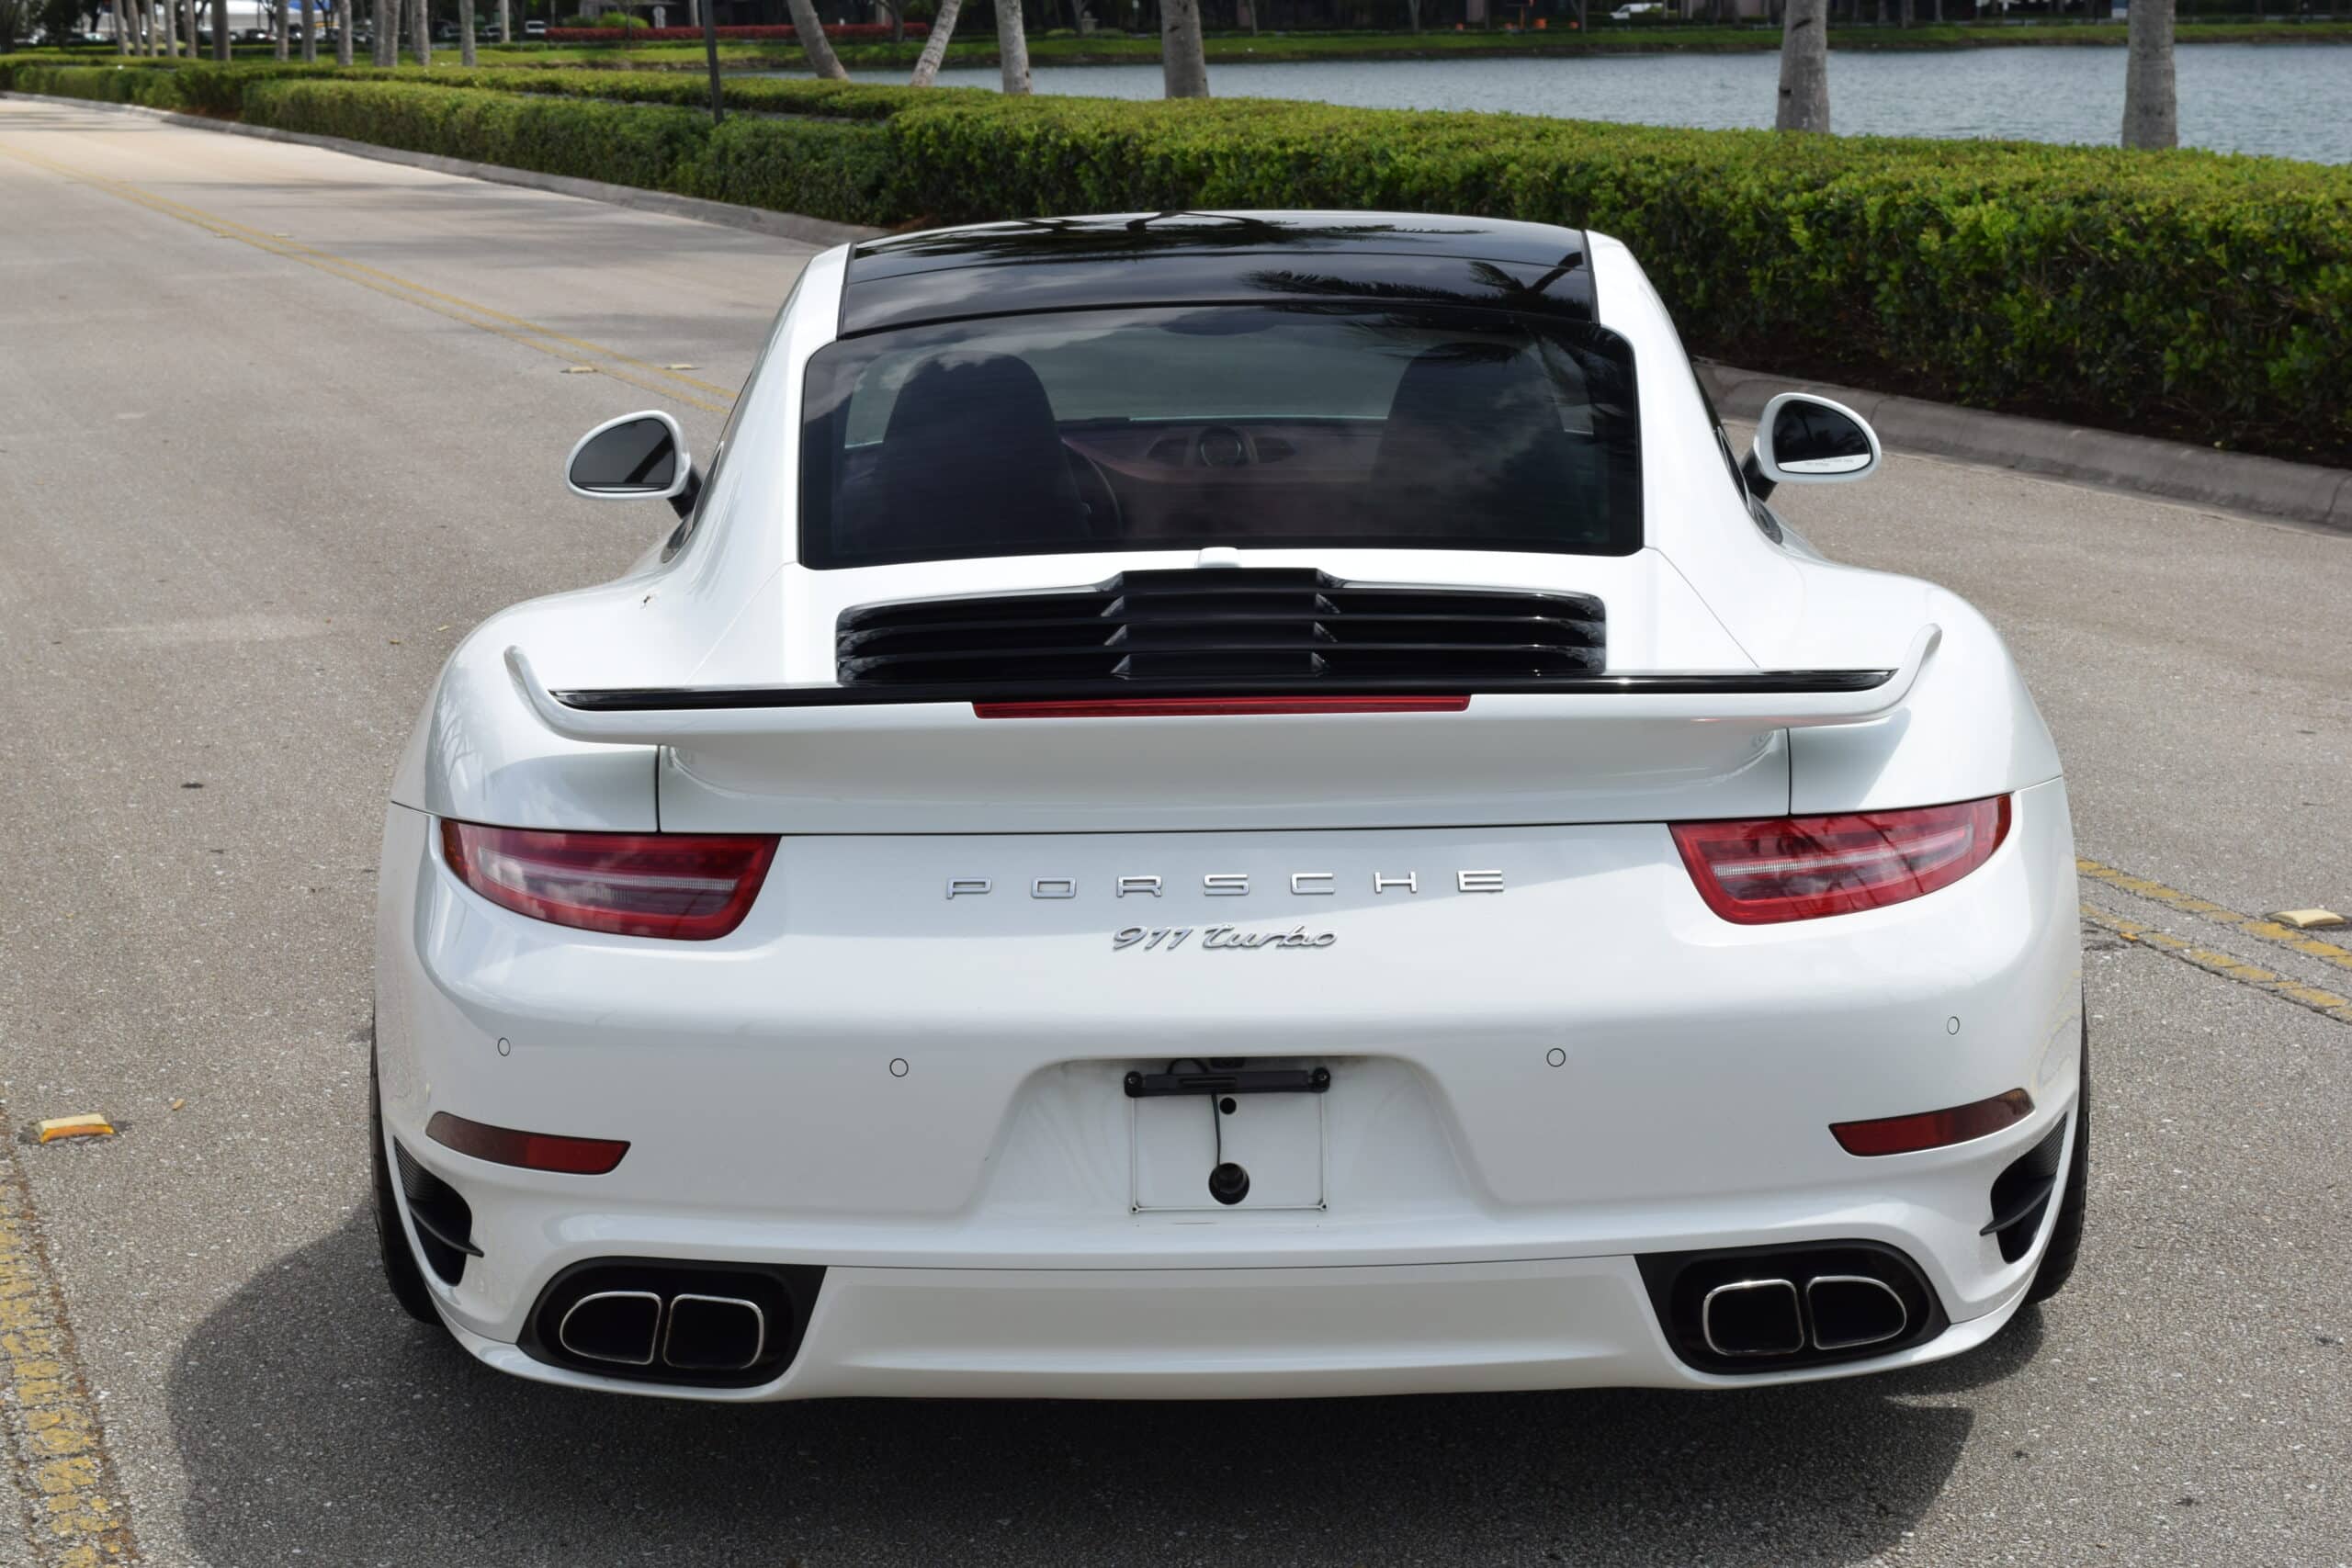 2015 991 Turbo, $ 171K MSRP BIG factory options list, Champion Porsche upgrades, Faster than a Turbo S